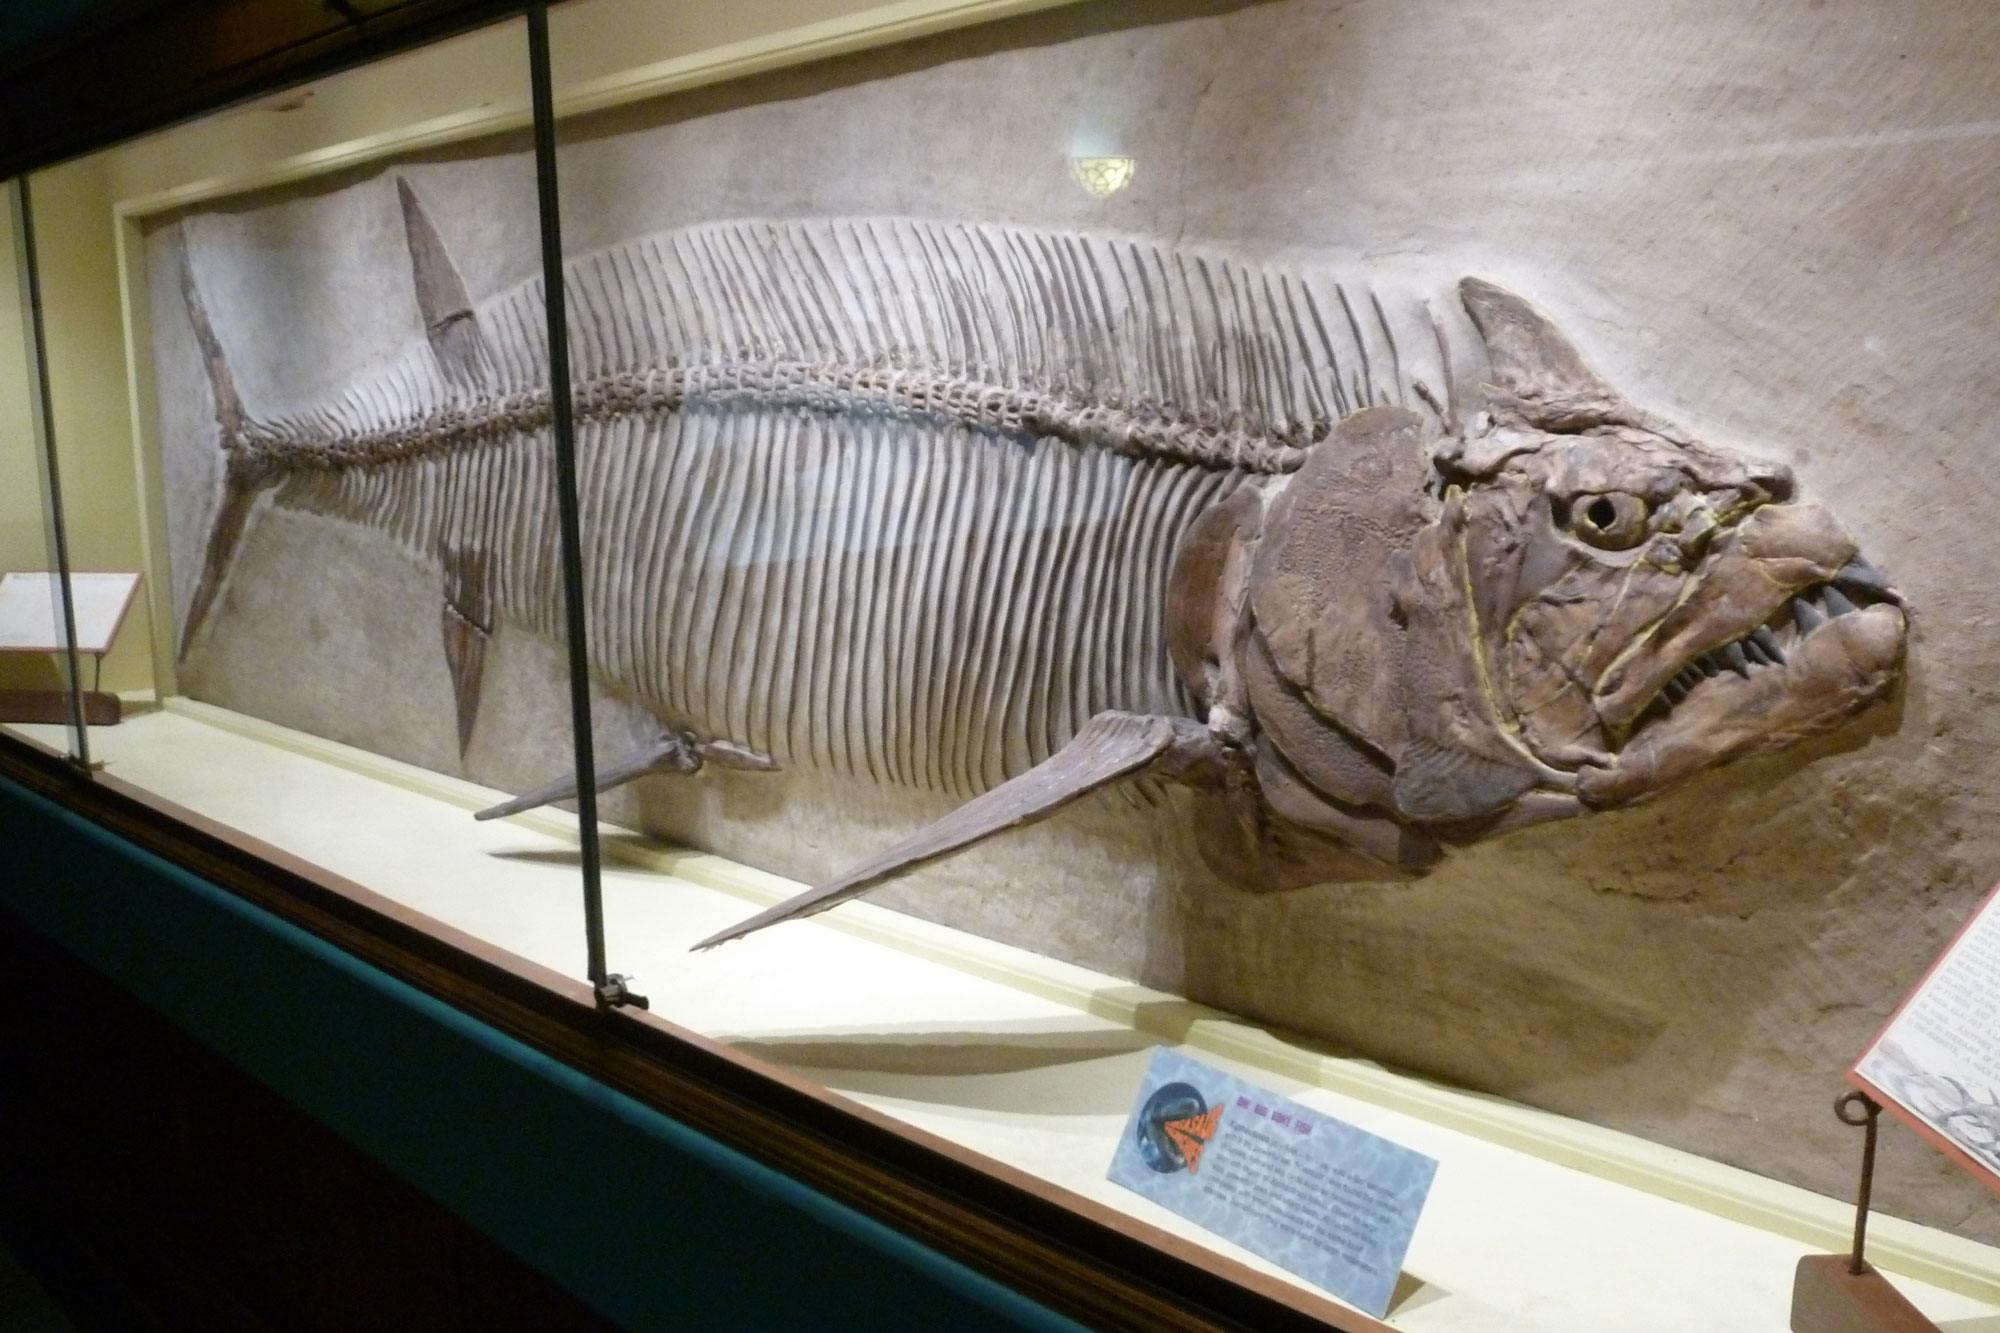 Photograph of a large fossil fish, Xiphactinus, skeleton on display at the University of Kansas Natural History Museum in Lawrence, Kansas.